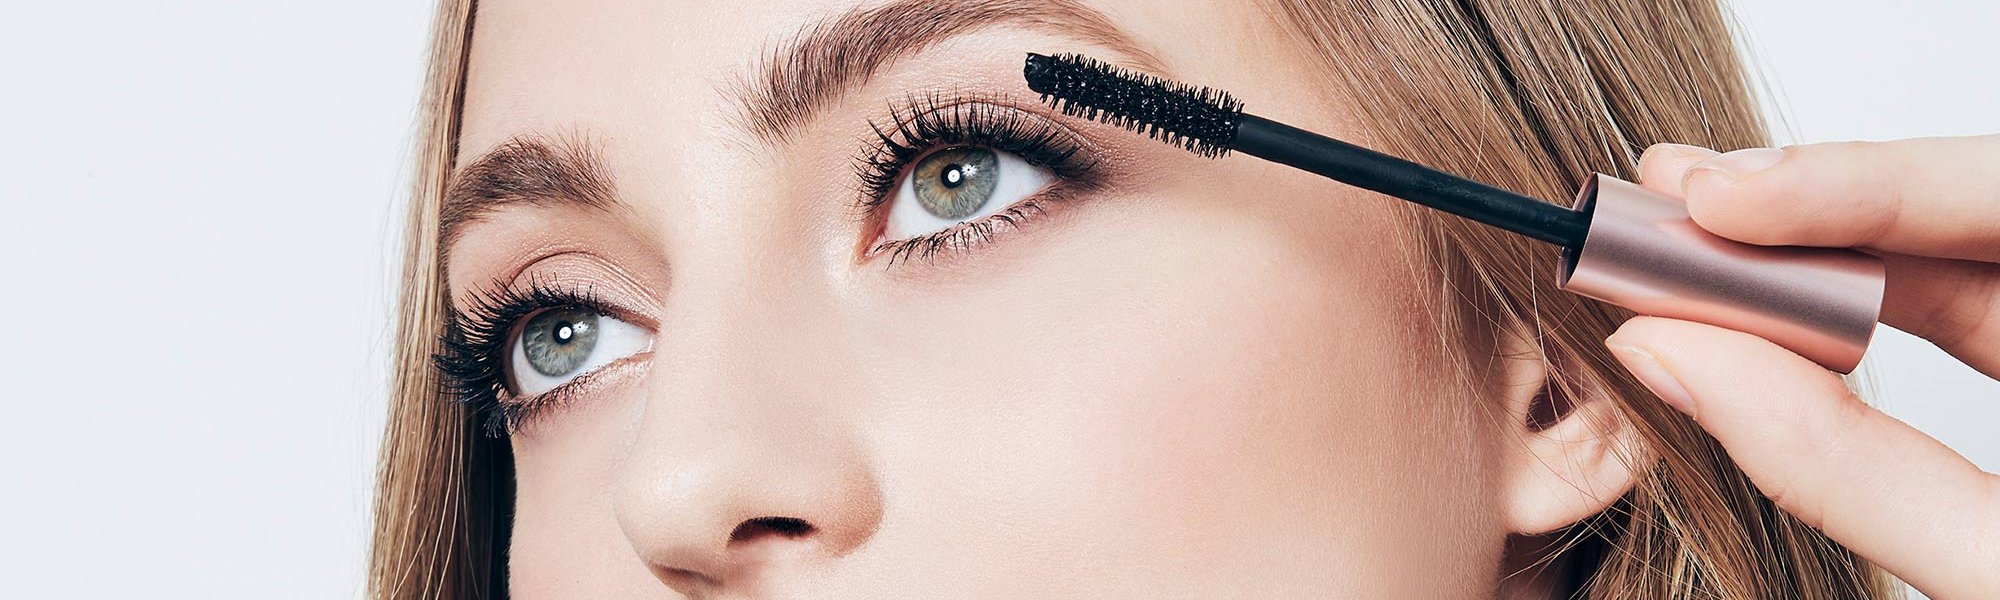 How To Layer Mascara To Get Different Lash Looks